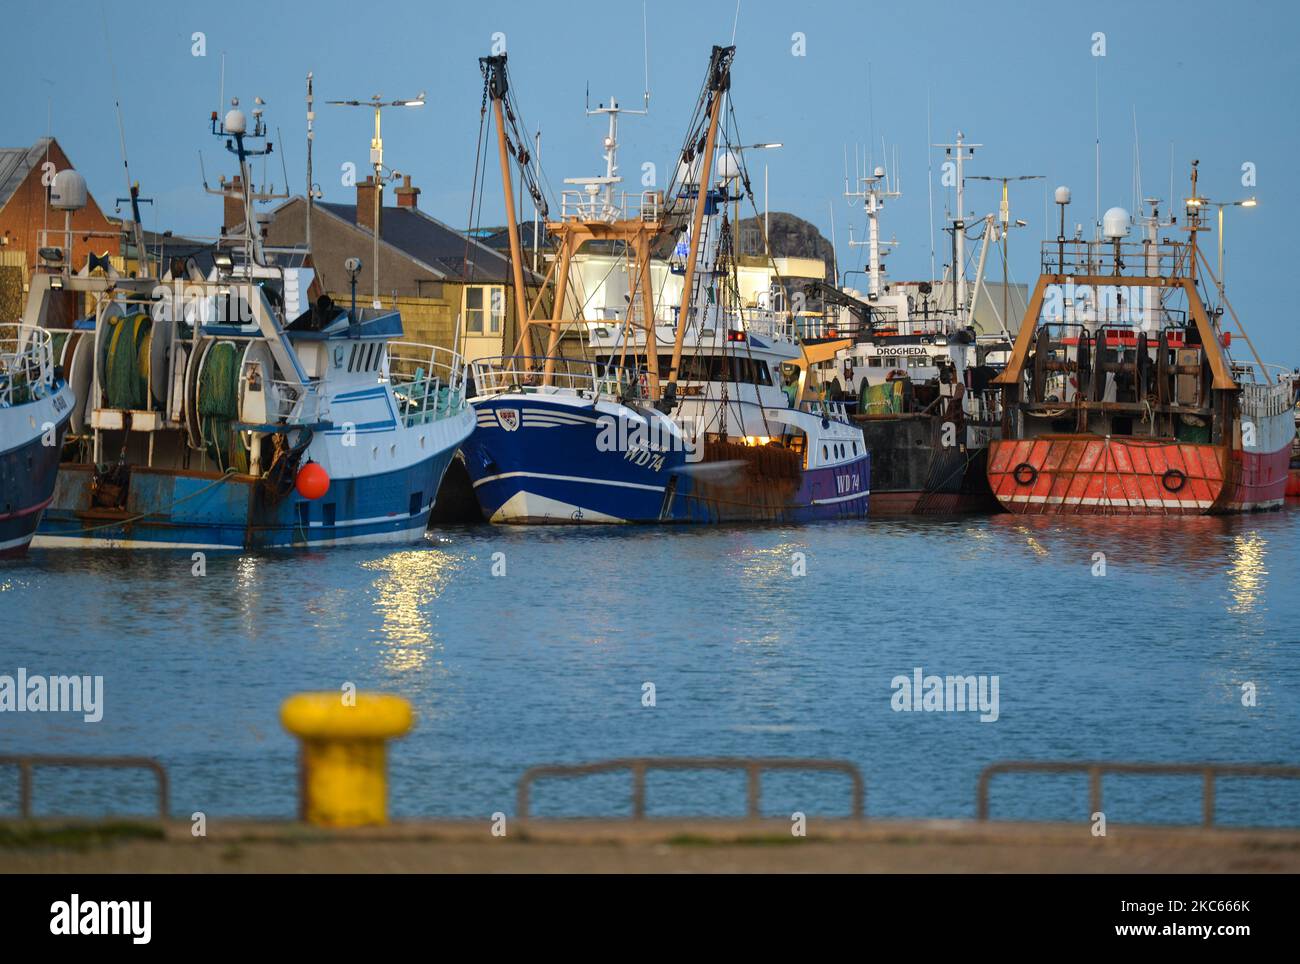 Fishing boats moored in Howth Harbor. Following Brexit, the UK will no longer be part of the EU Commons Fisheries Policy (CFP). Becoming an independent coastal state it will be fully responsible for managing fisheries in the UK’s Exclusive Economic Zone of 200 miles (including setting total allowable catches, distributing quotas and determining access to fisheries). However, access for EU vessels to UK waters and vice versa is part of the ongoing negotiations and a future agreement with the EU. According to Patrick Murphy, chief executive of the Irish South and West Fish Producers Organisation Stock Photo